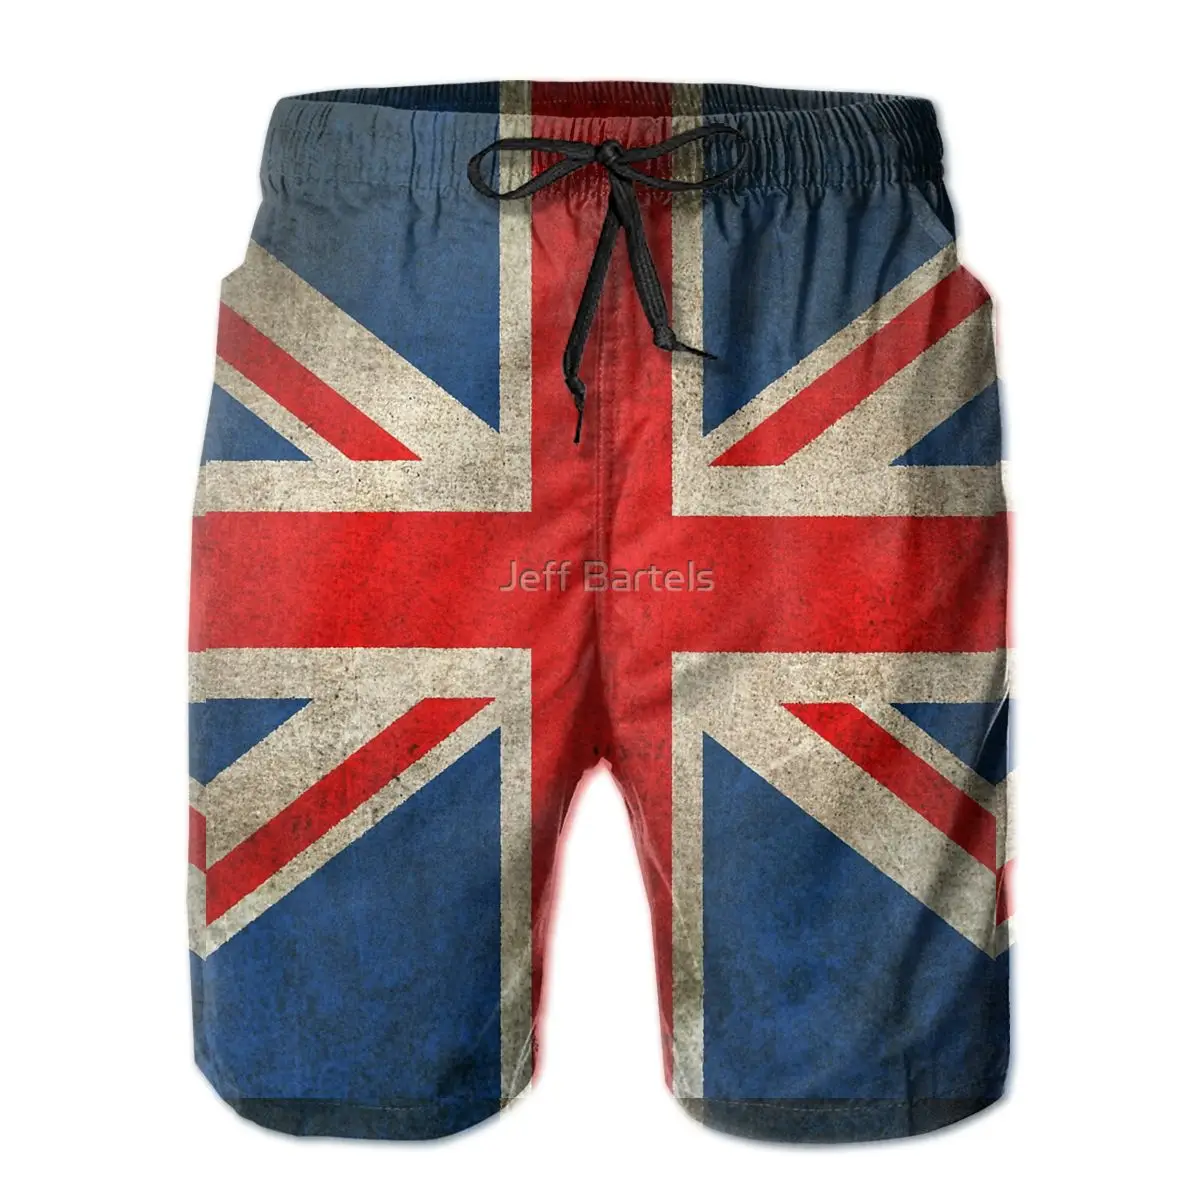 

R333 Loose Old And Worn Distressed Vintage Union Jack Flag Y Shorts Breathable Quick Dry Funny Joke Male Shorts